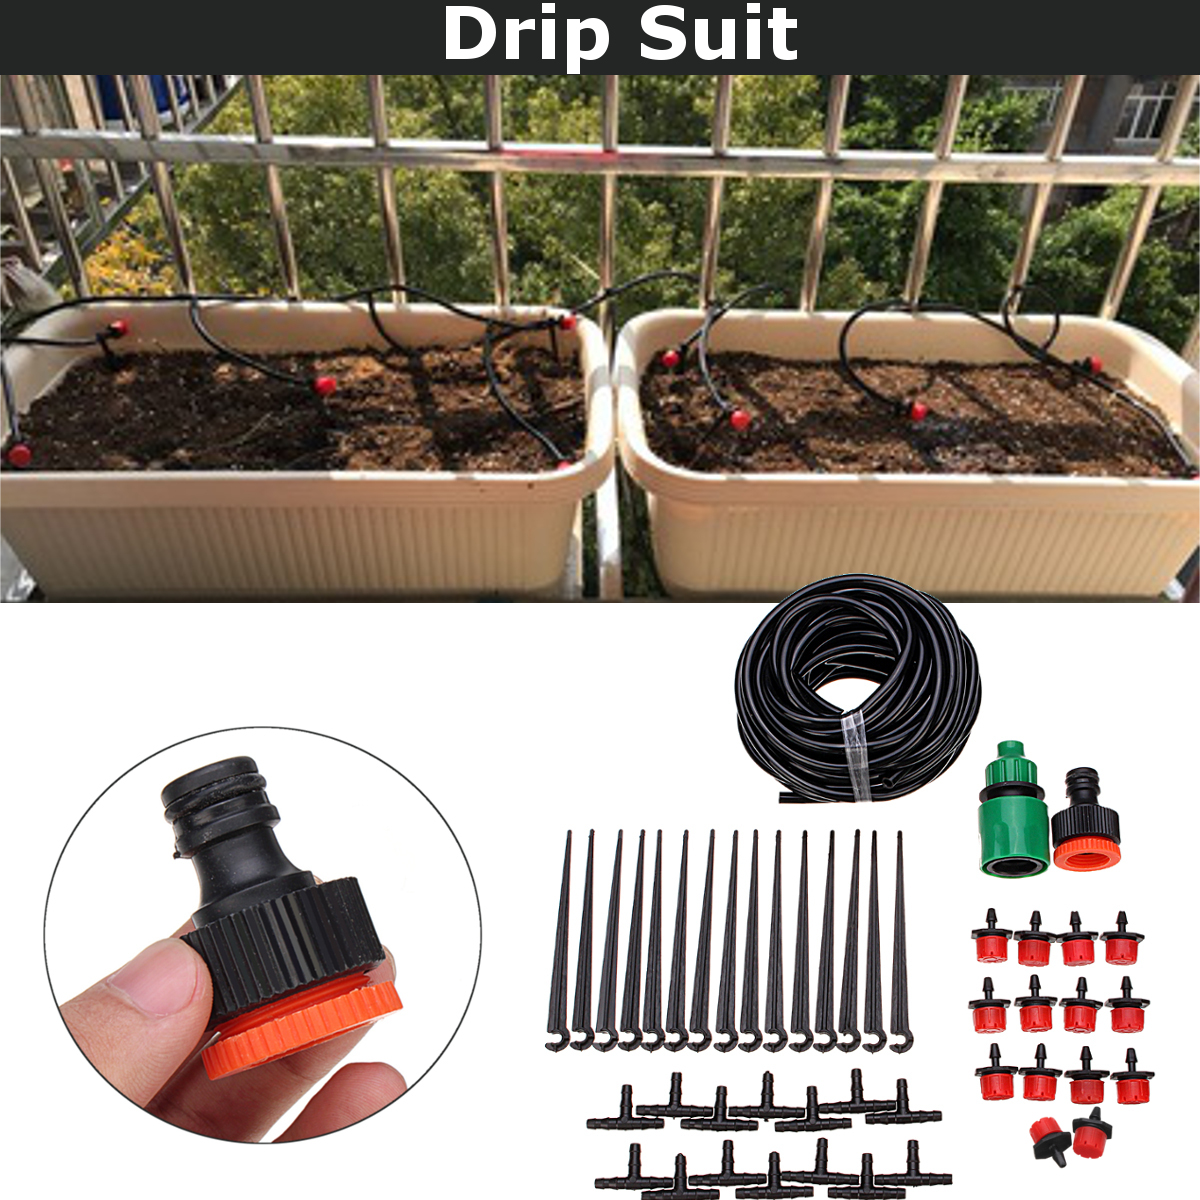 47PCS-Drip-Irrigation-Greenhouse-Garden-Plant-Watering-System-Hose-Kits-Adjusted-1518267-3